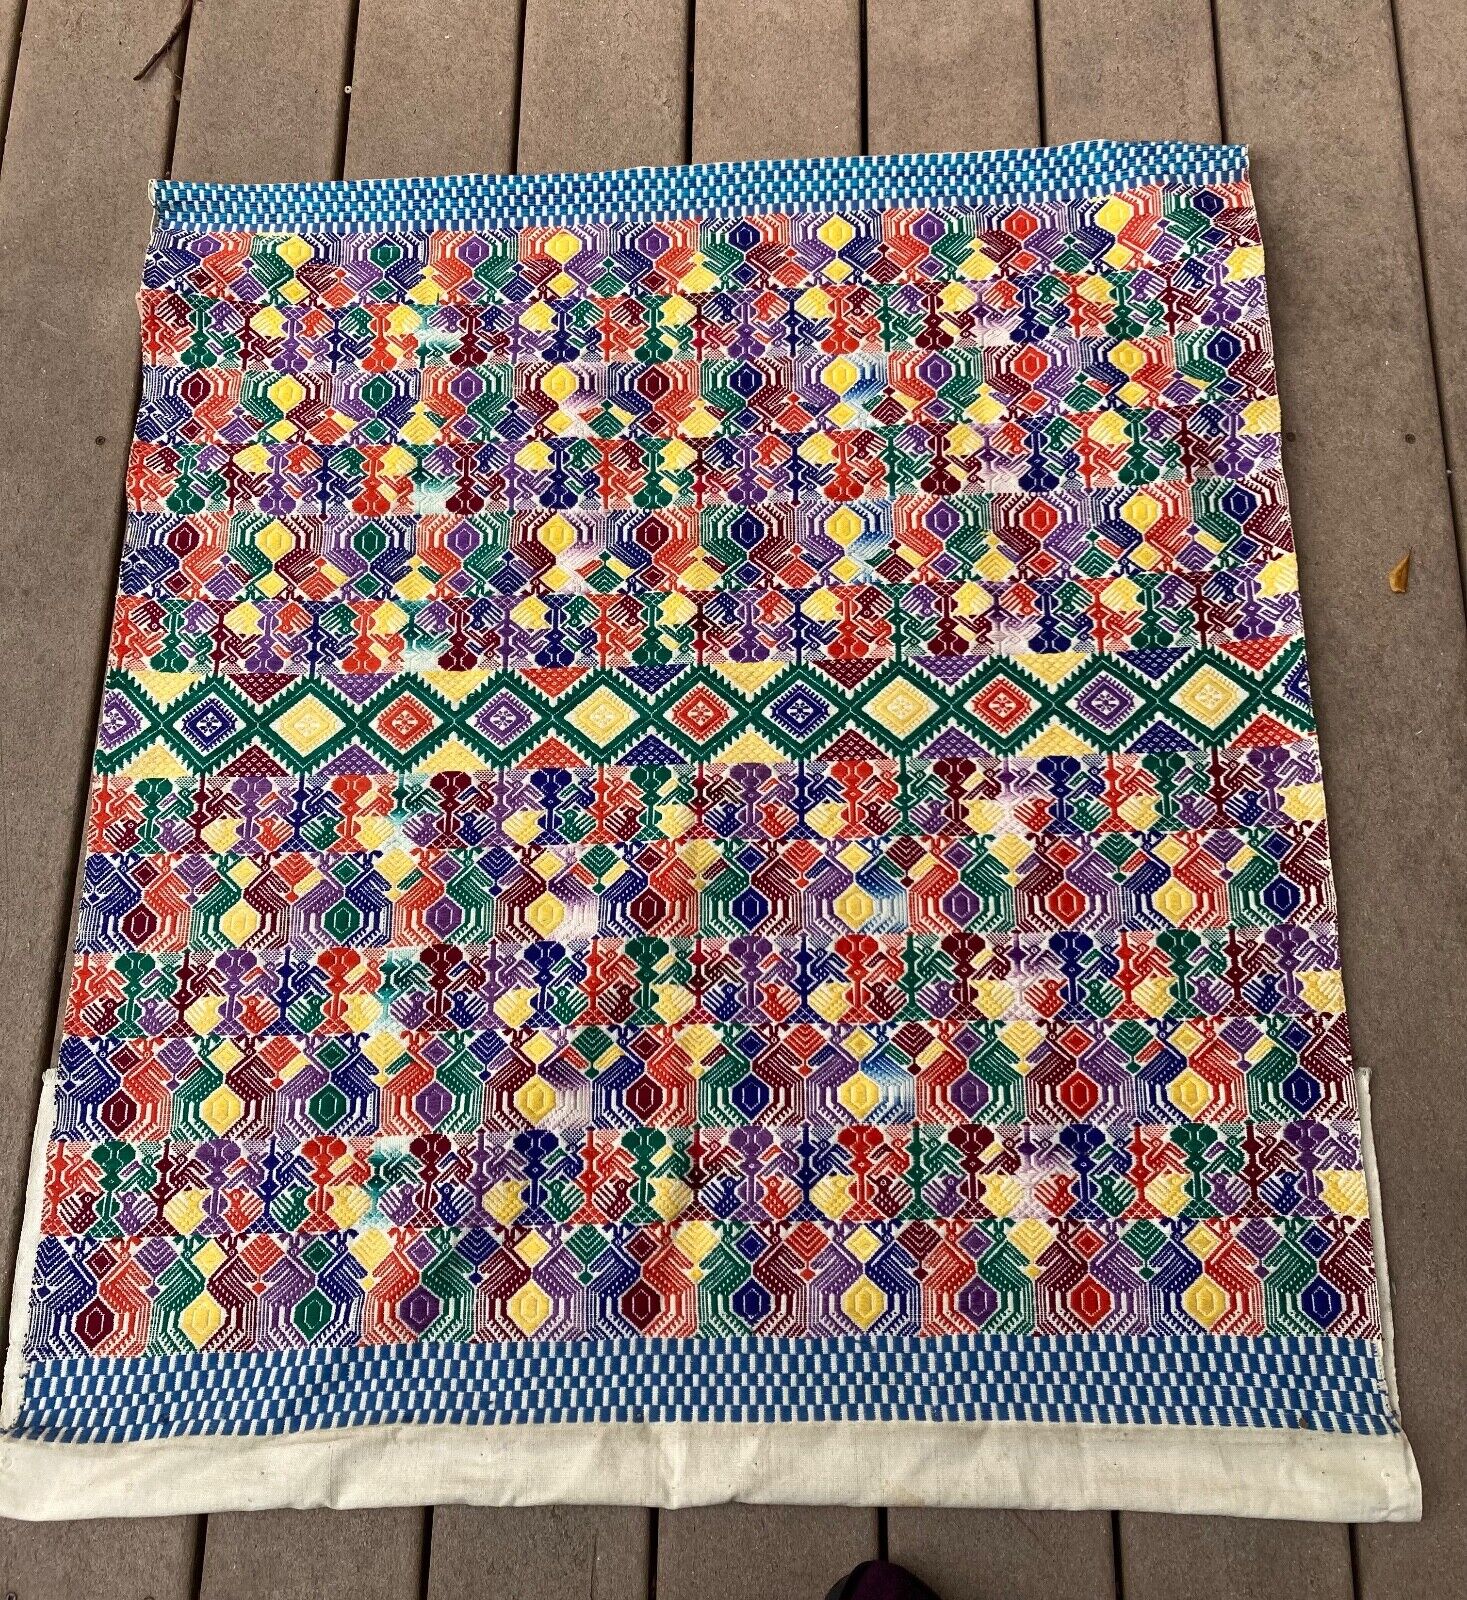 Guatemalan hand-woven vintage textile from village of Totonicapan